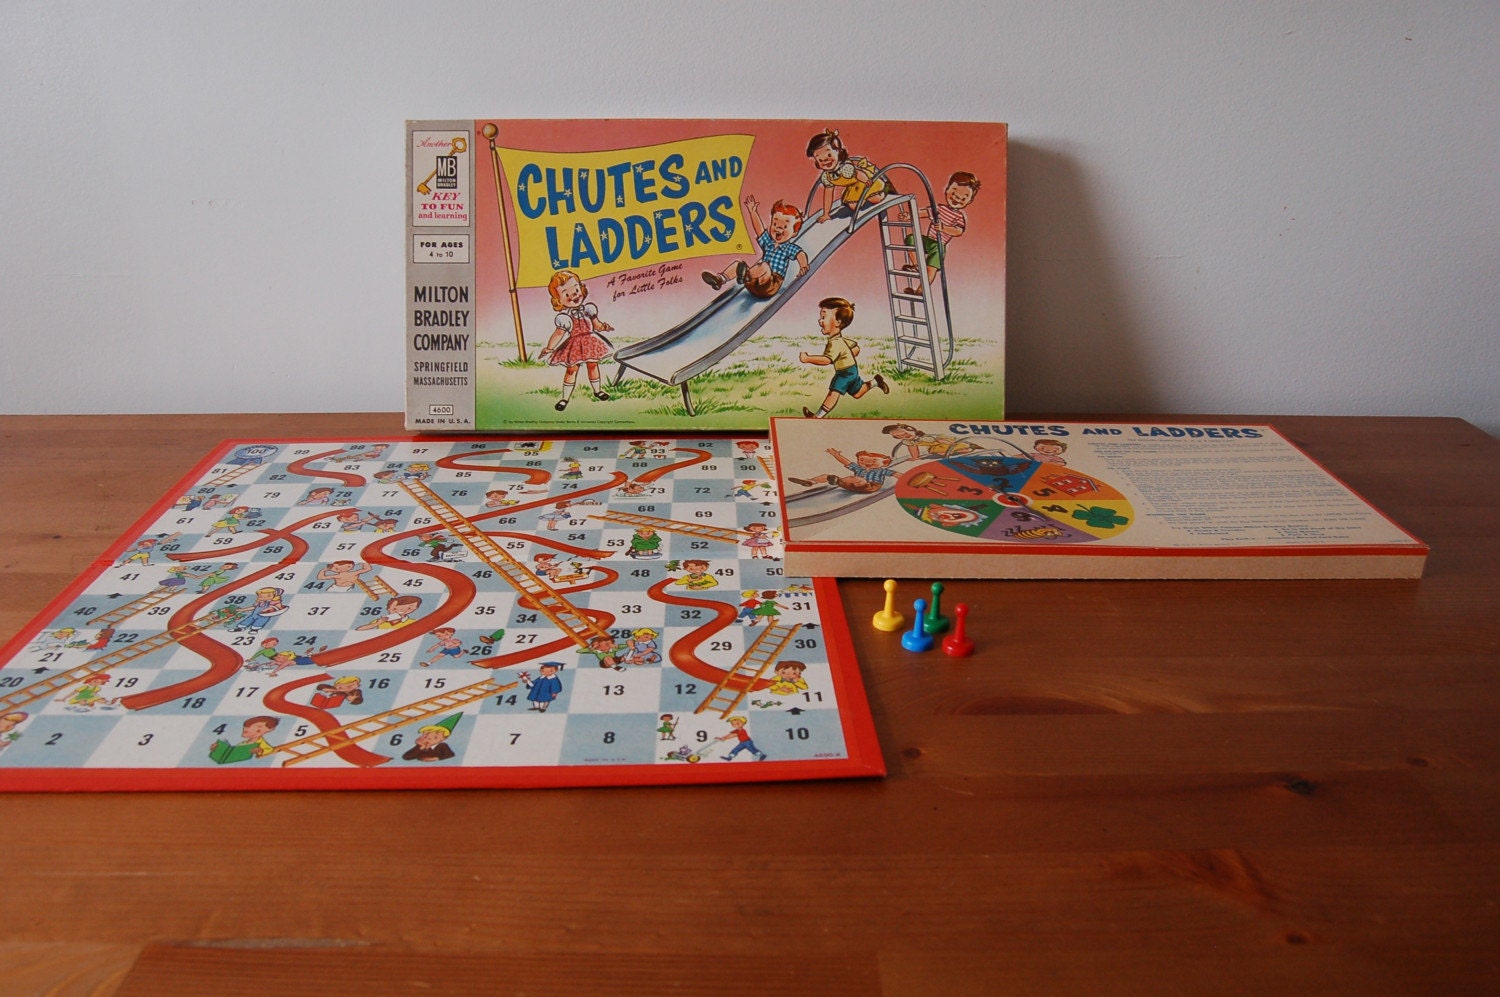 Vintage CHUTES and LADDERS board game. 1956 by thevintageholicfrog